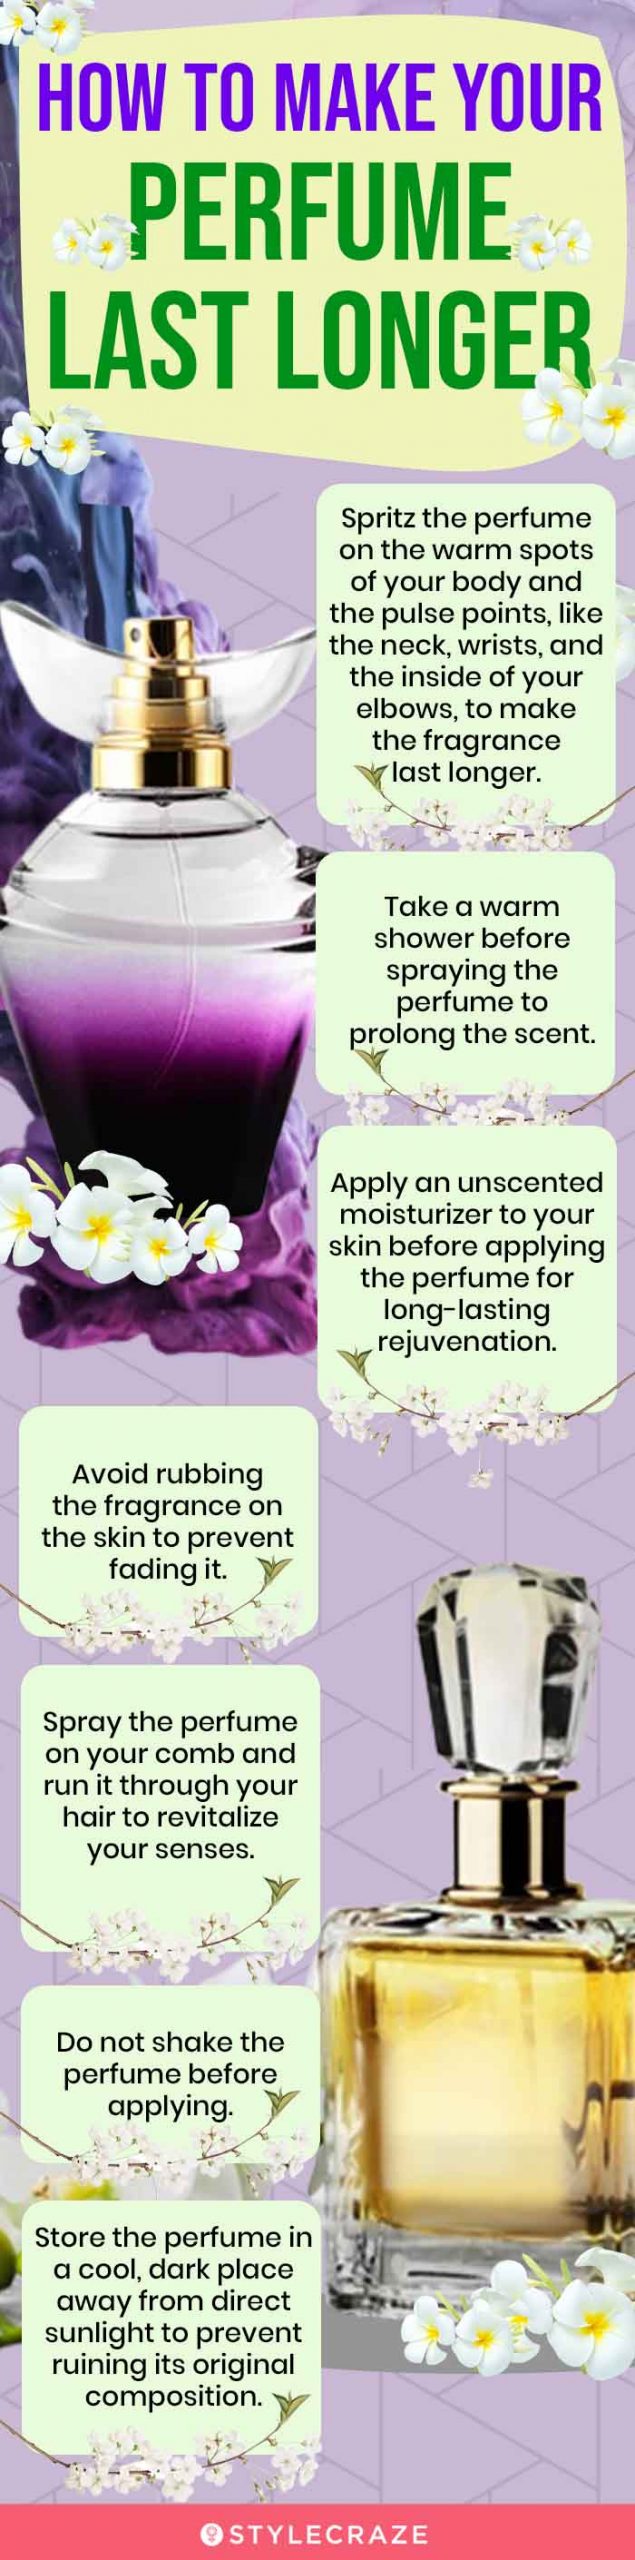 How To Make Your Perfume Last Longer (infographic)